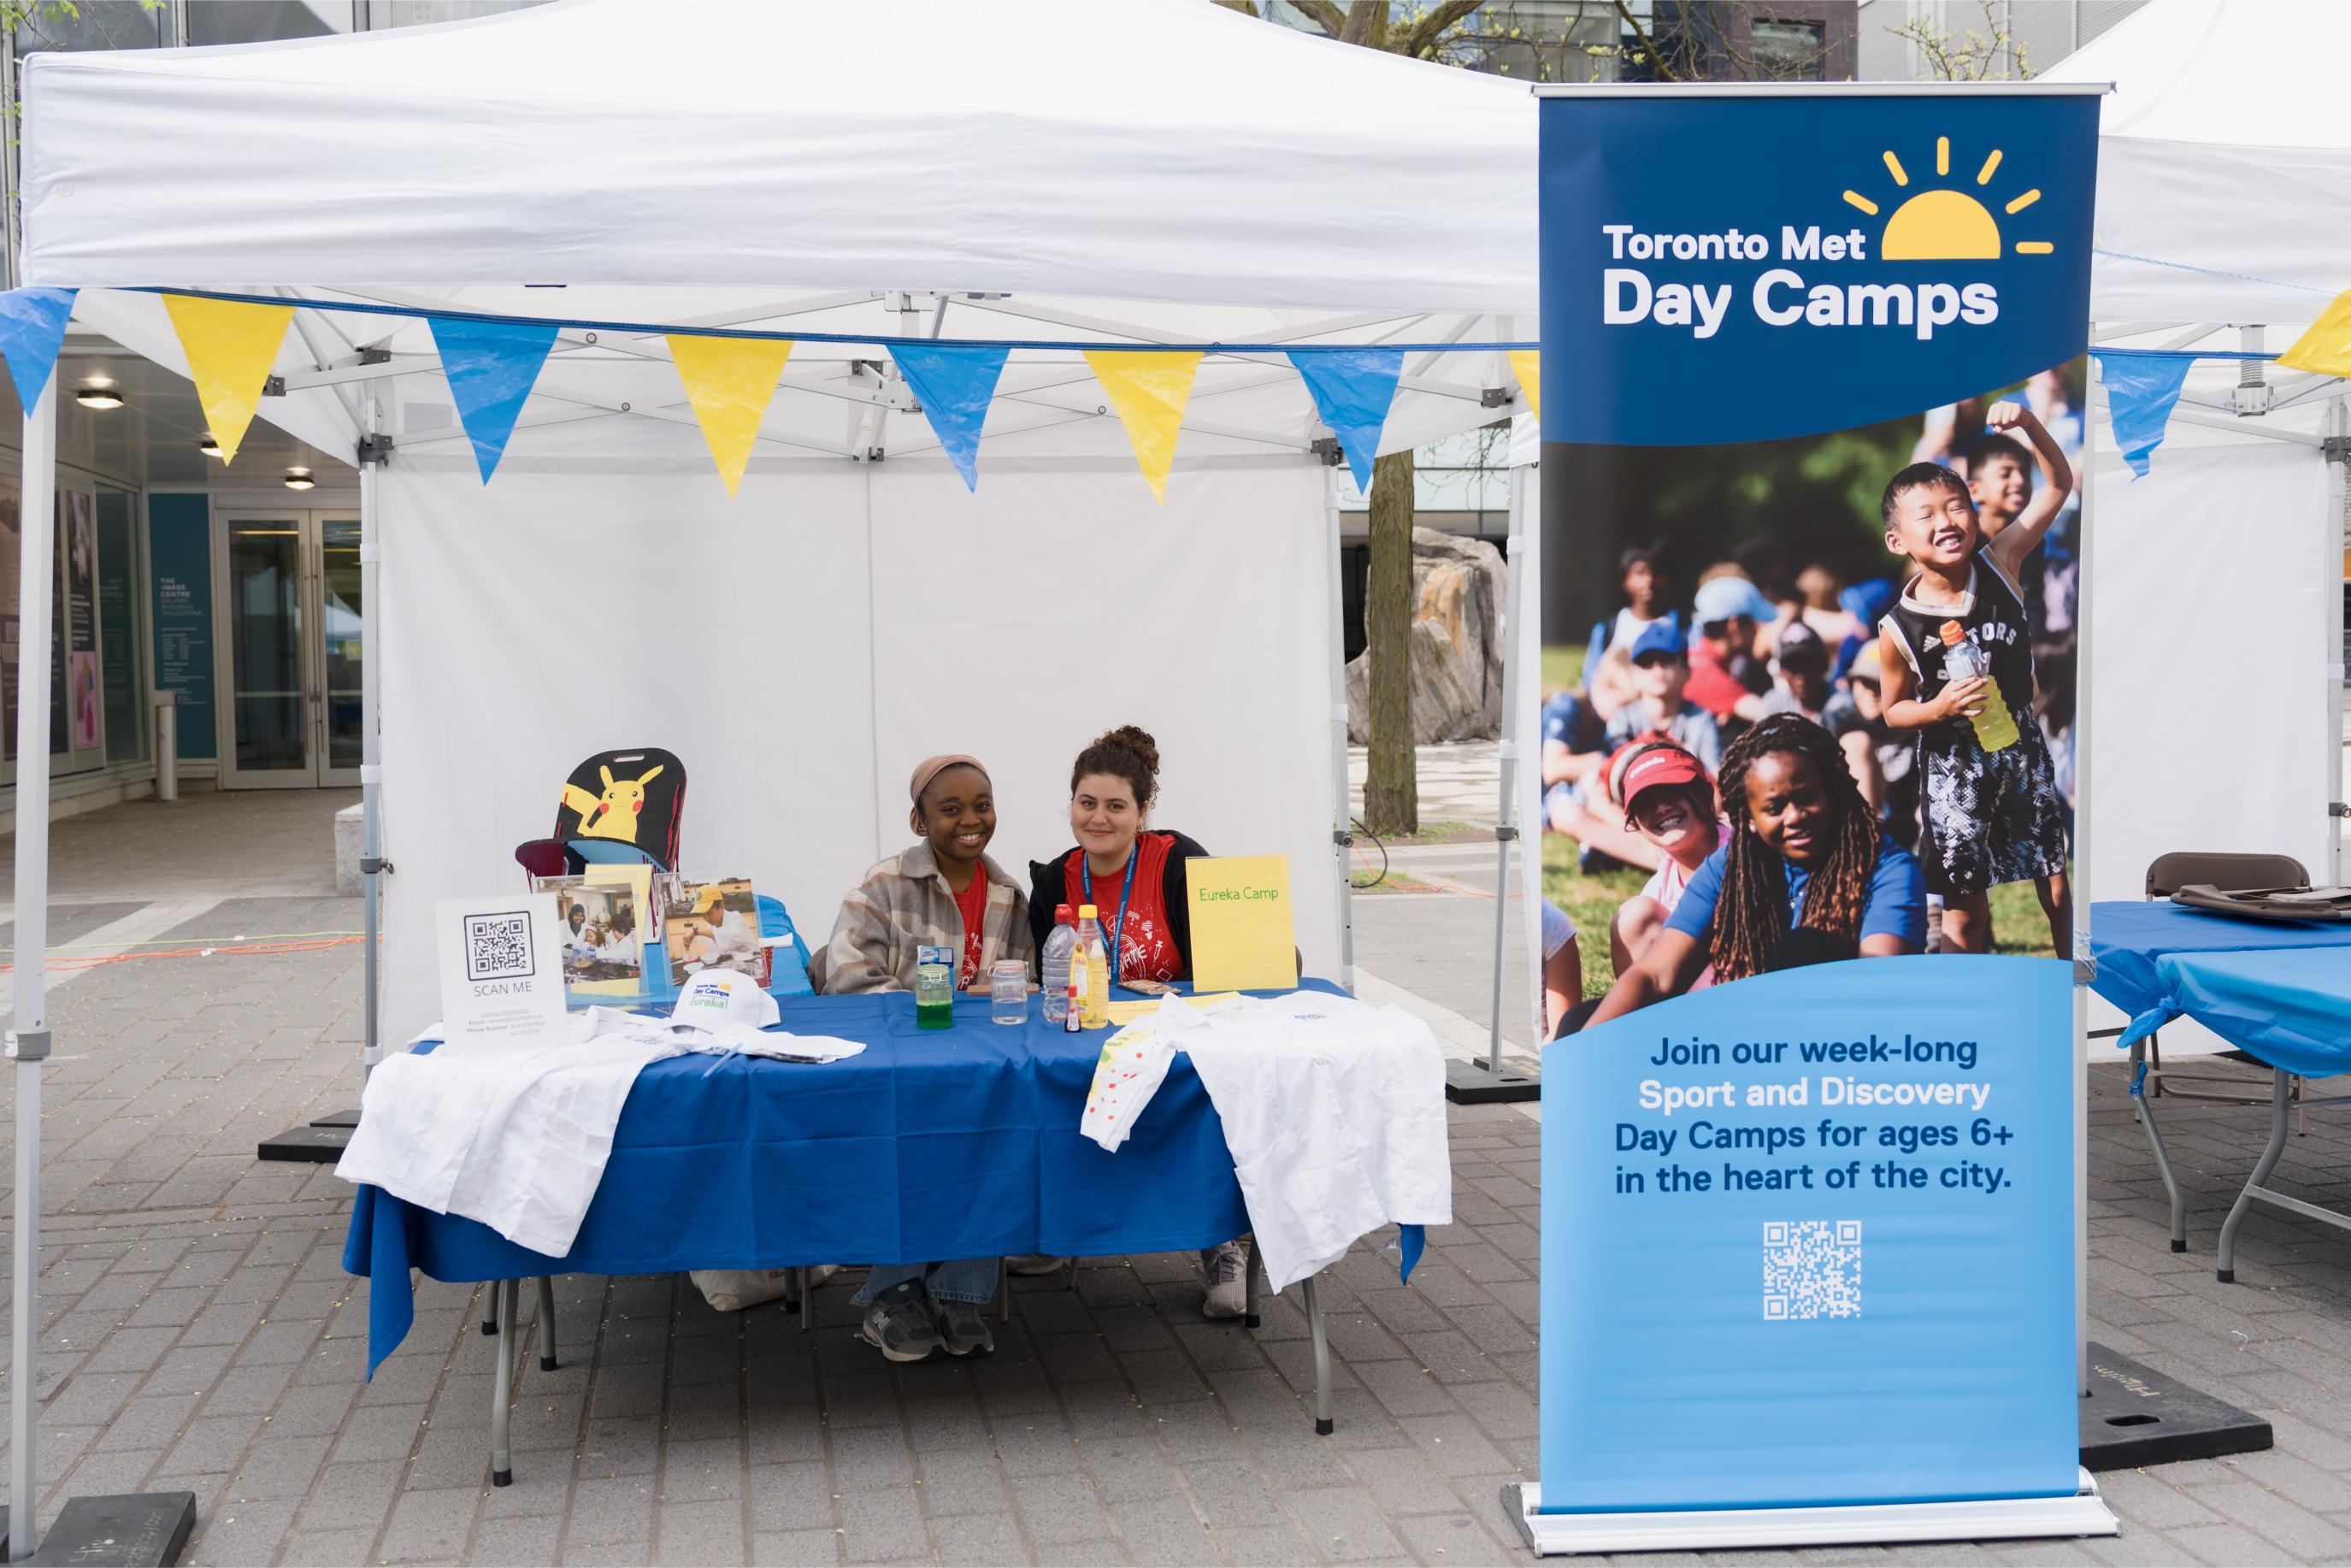 The Toronto Met Day Camp Booth and our volunteers posing at the booth.